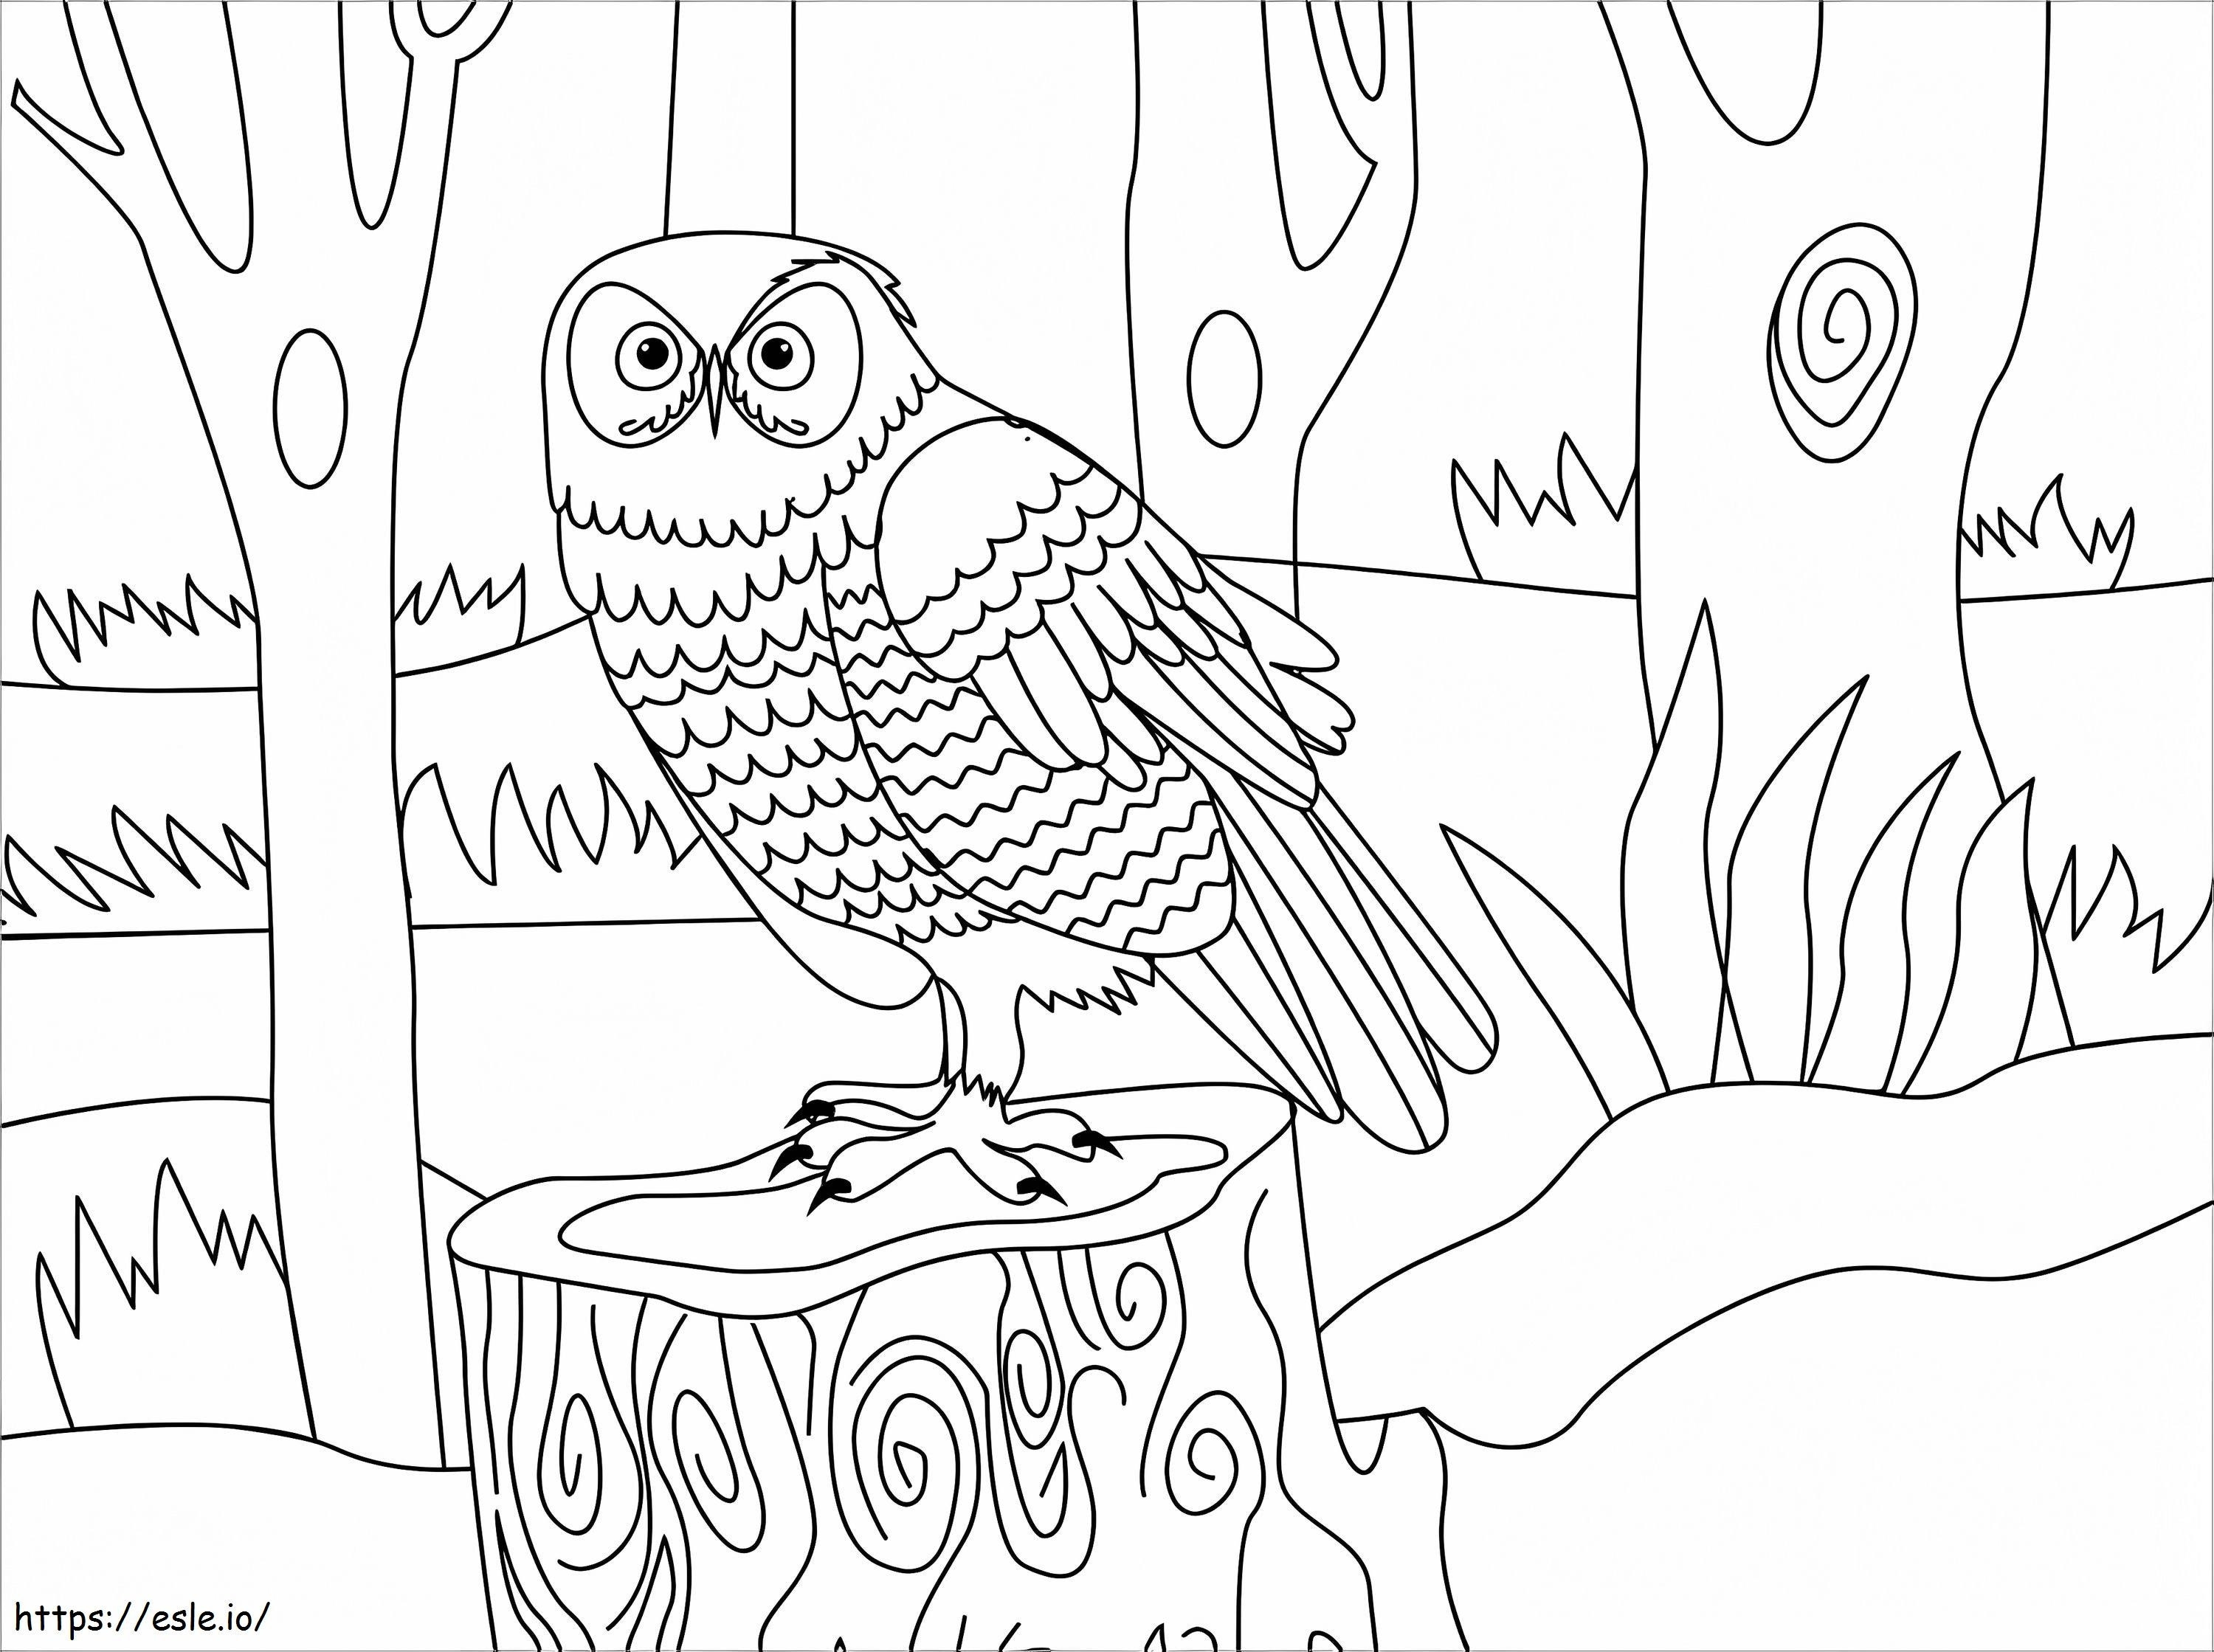 Owl 13 coloring page